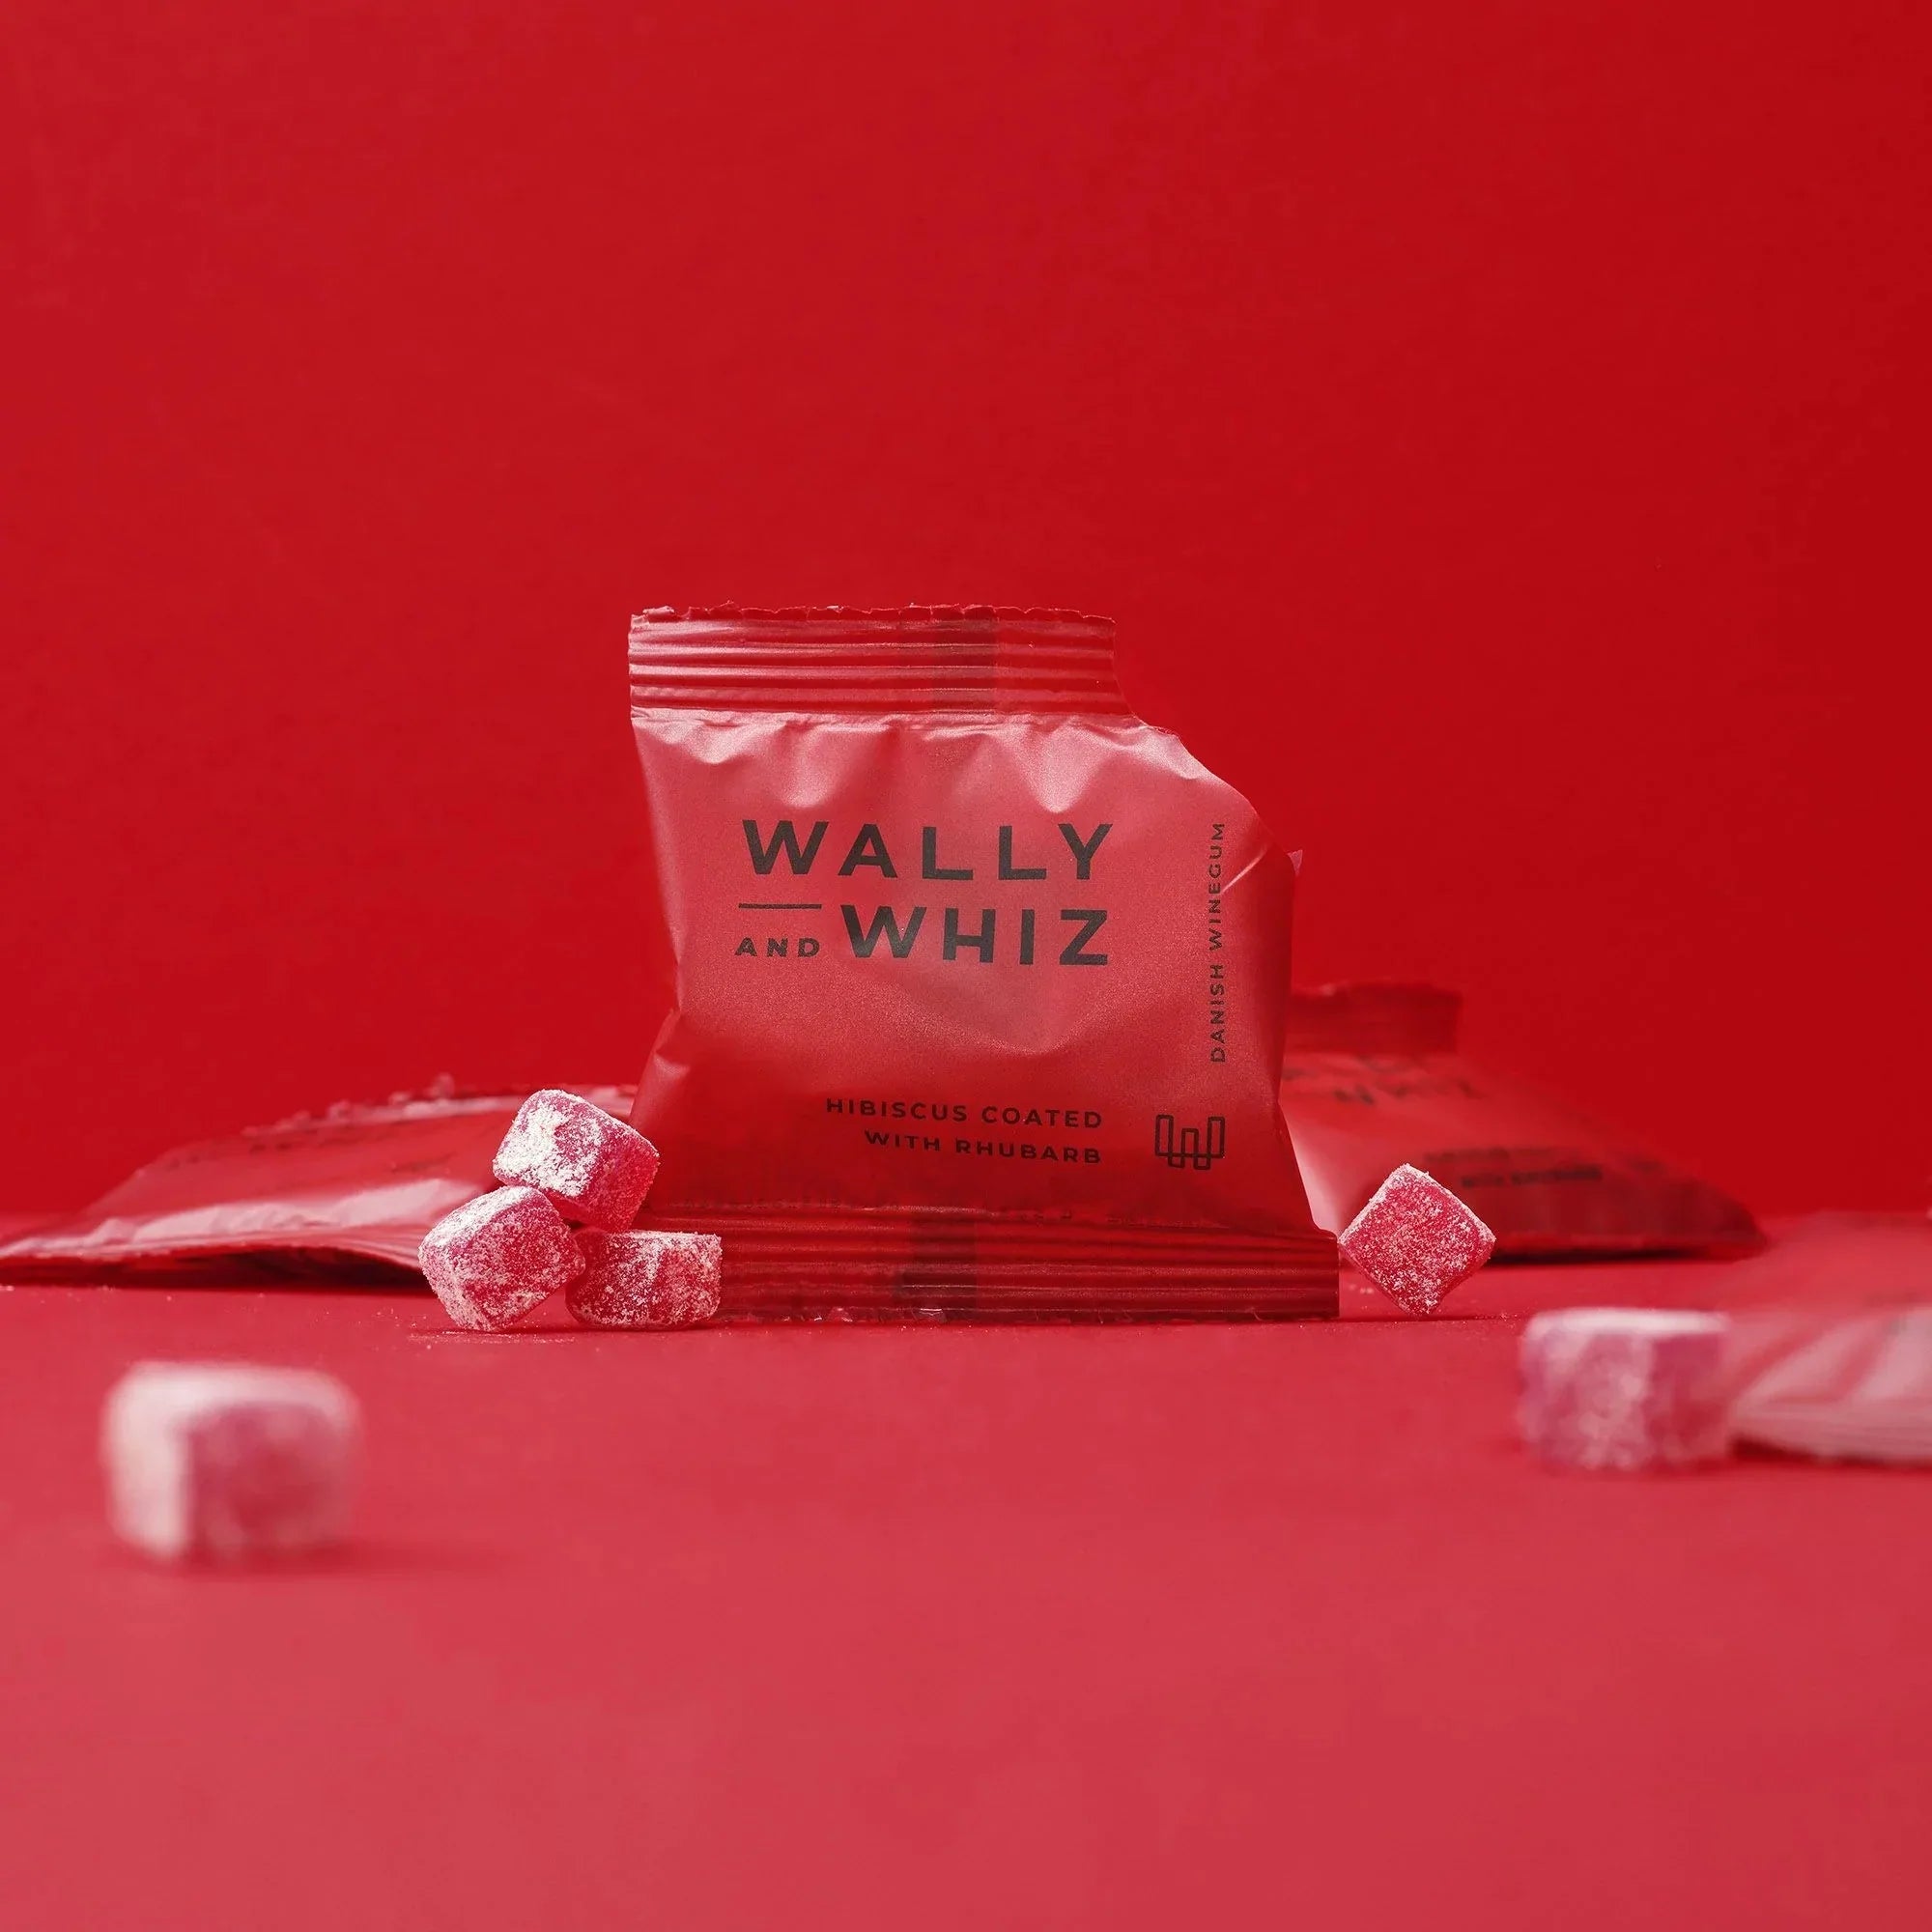 Wally And Whiz Wine Gum Flowpack Box With 200 Flowpacks, Hibiscus With Rhubarb/Lychee With Raspberry